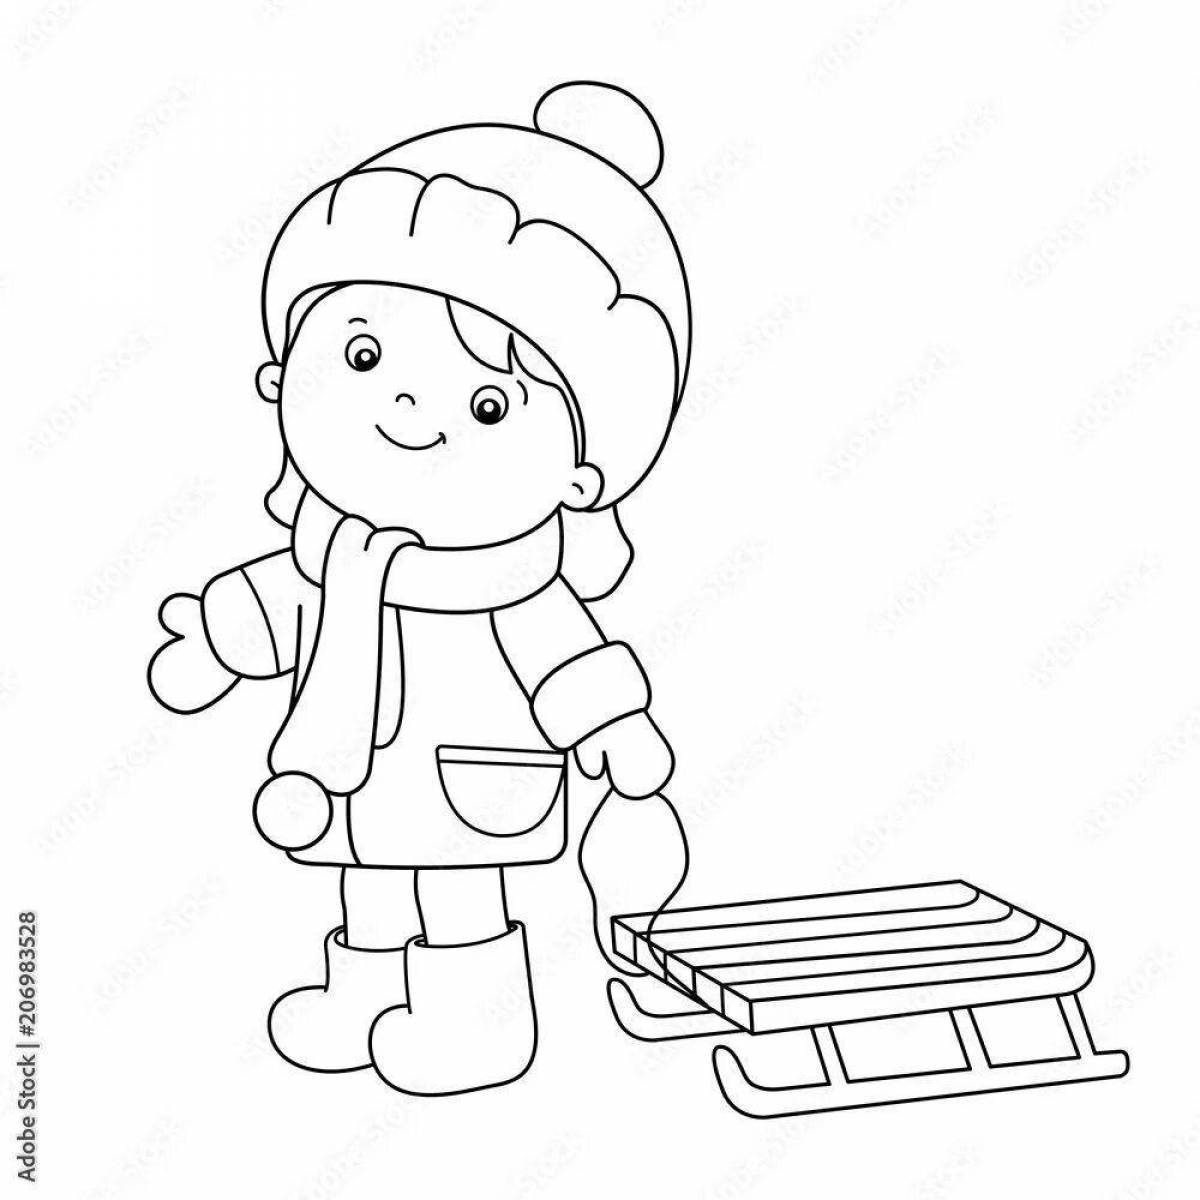 Awesome coloring doll in winter clothes